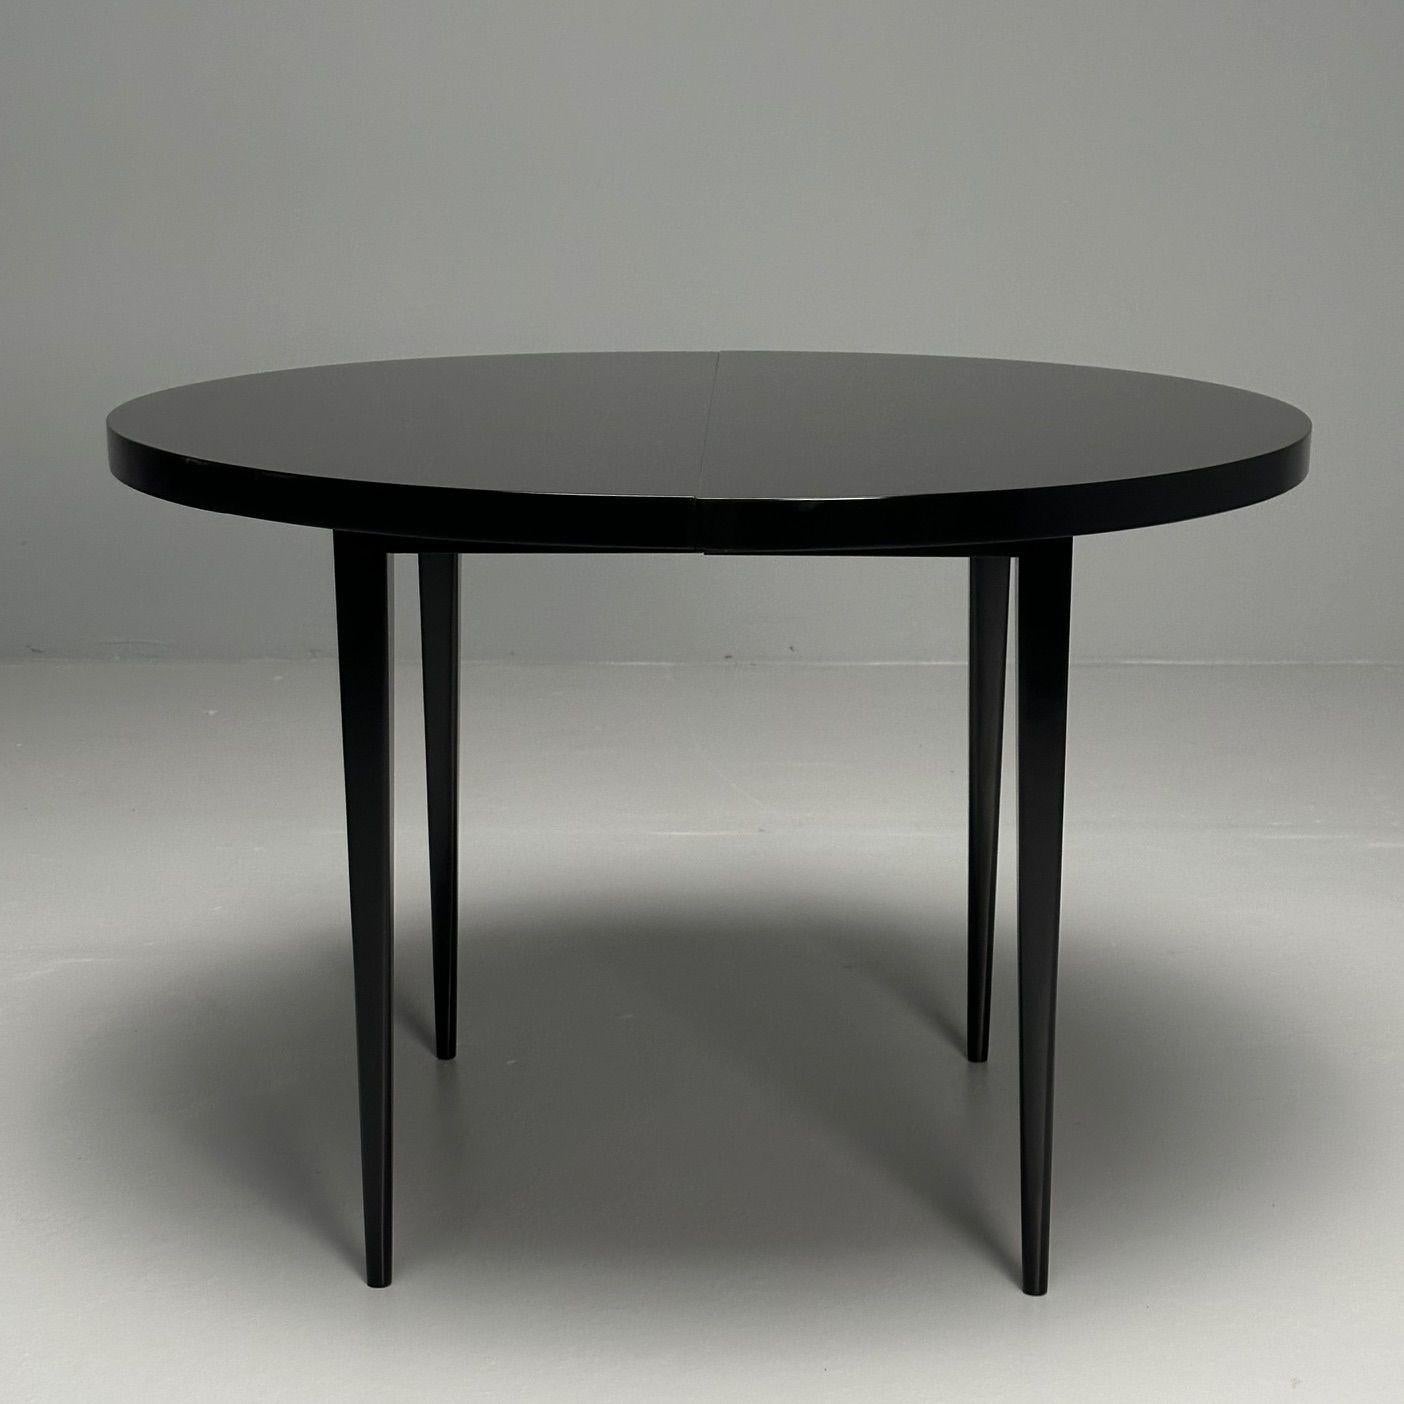 Paul McCobb, Mid-Century Modern Planner Group Dining Table, Black Lacquer, 1950s For Sale 4